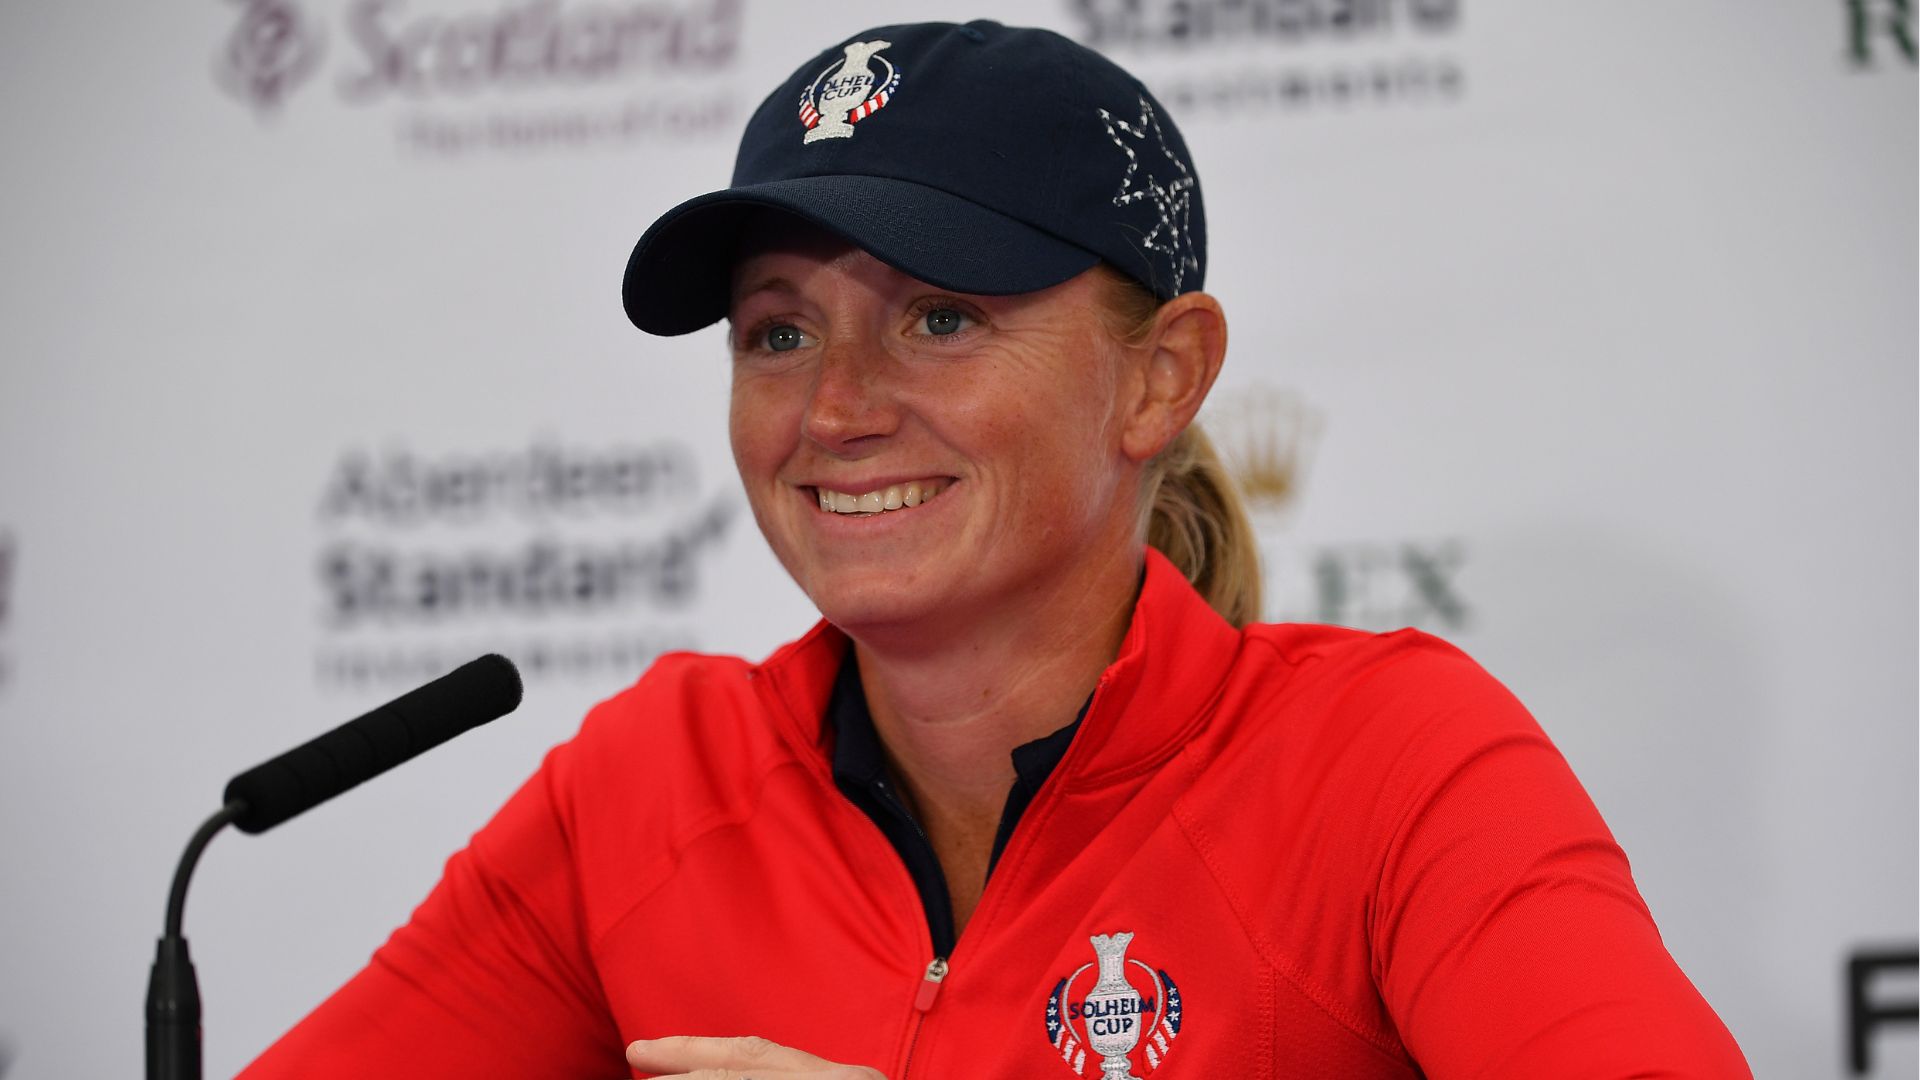 U.S. Solheim Cup captain Stacy Lewis already taking about Rose Zhang making team